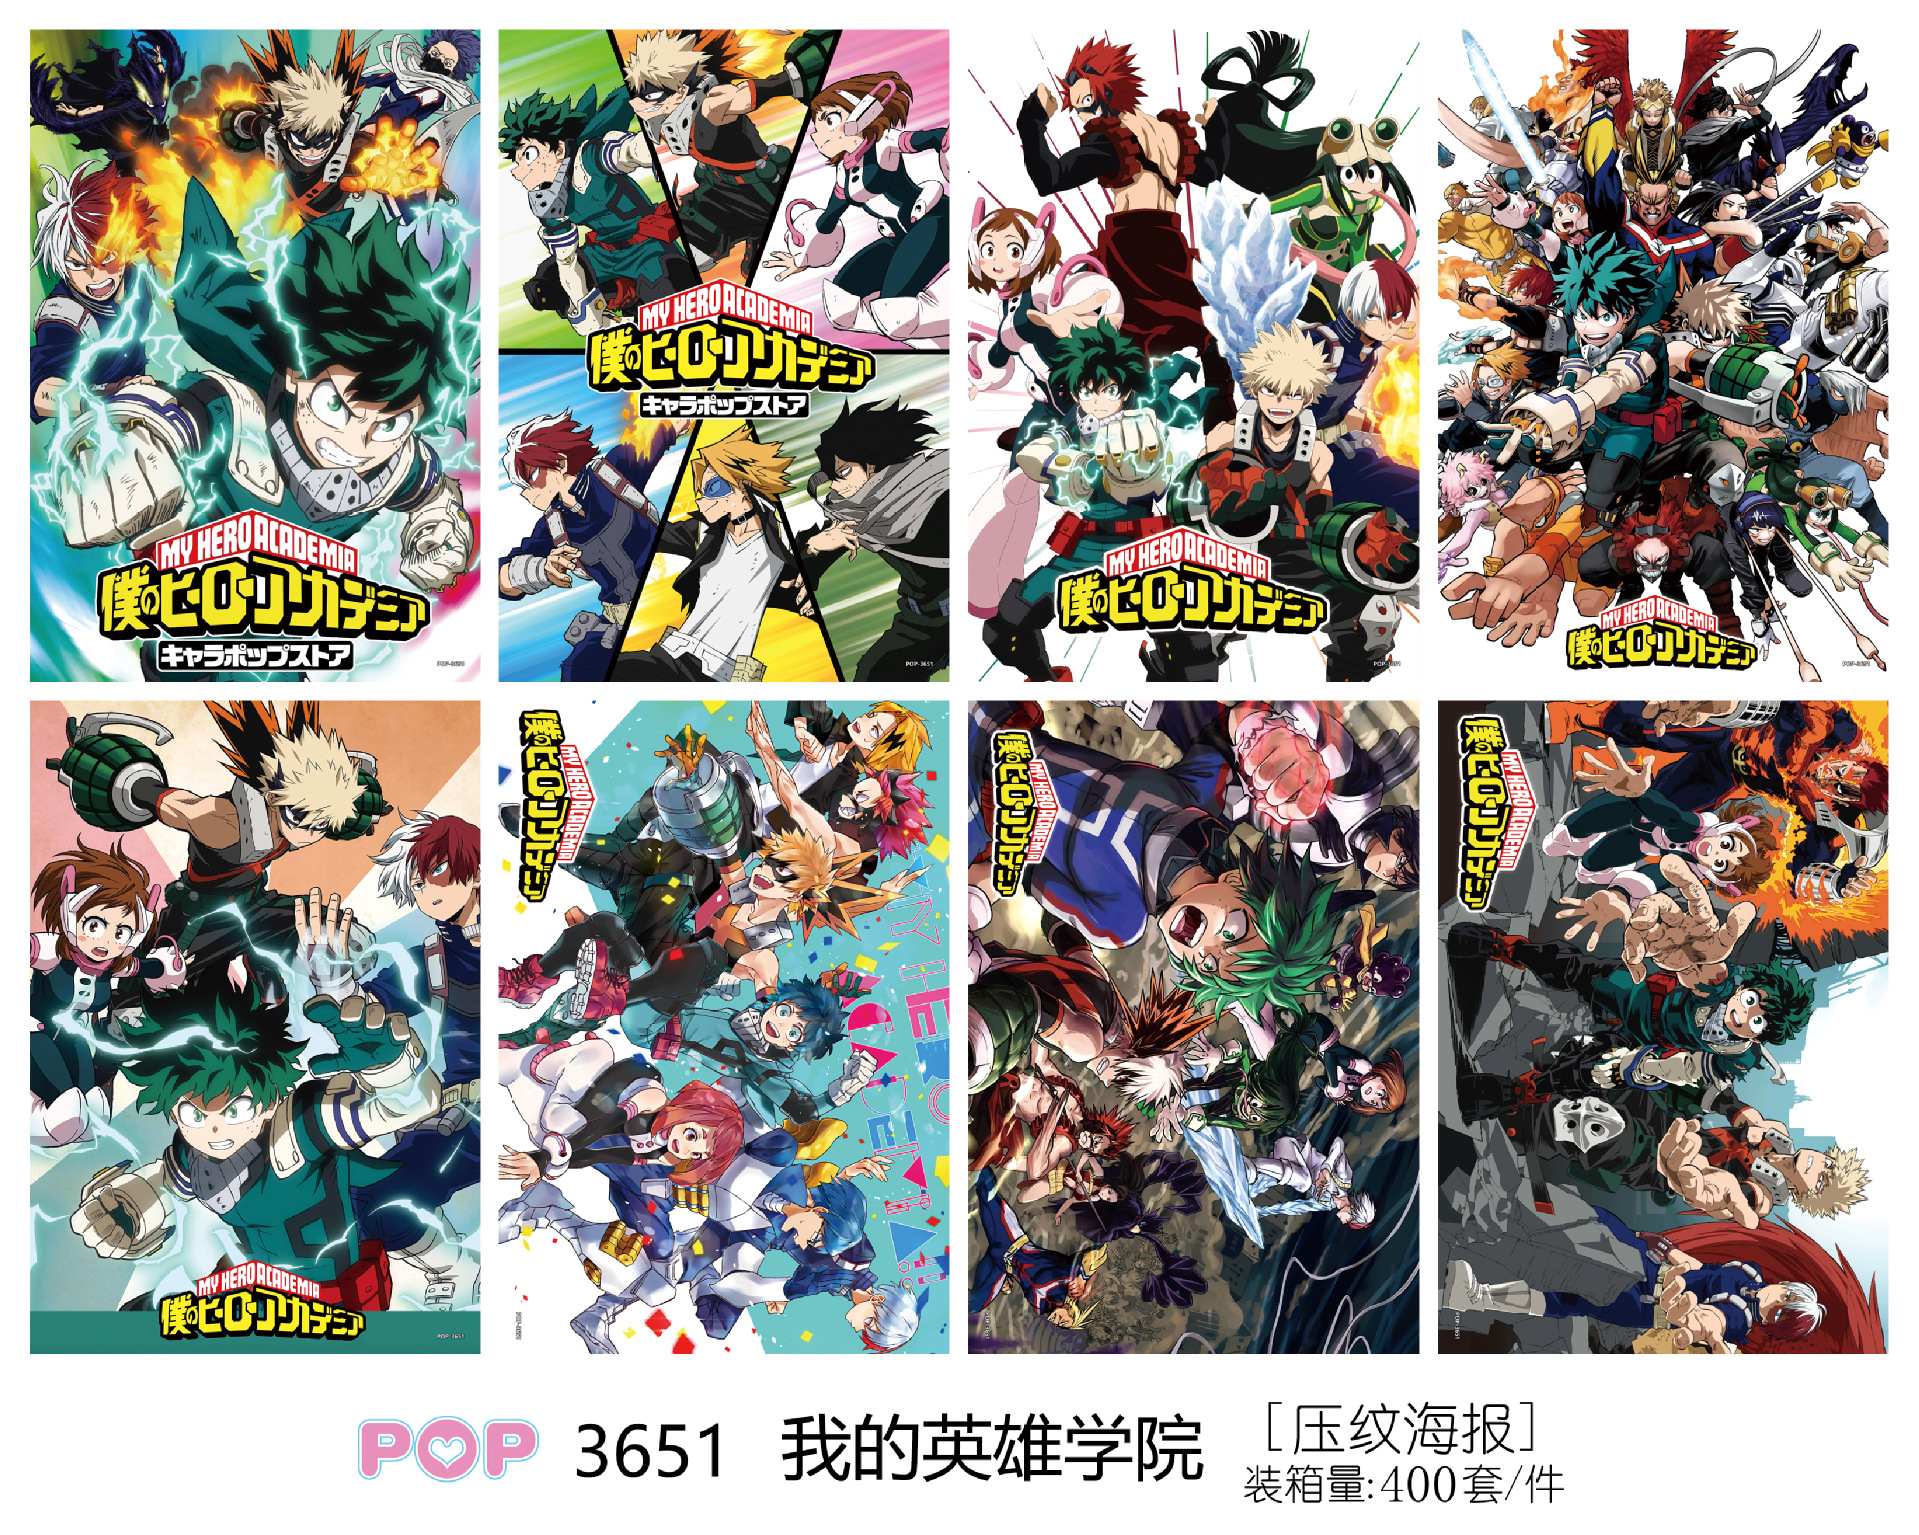 My Hero Academia anime poster price for a set of 8 pcs